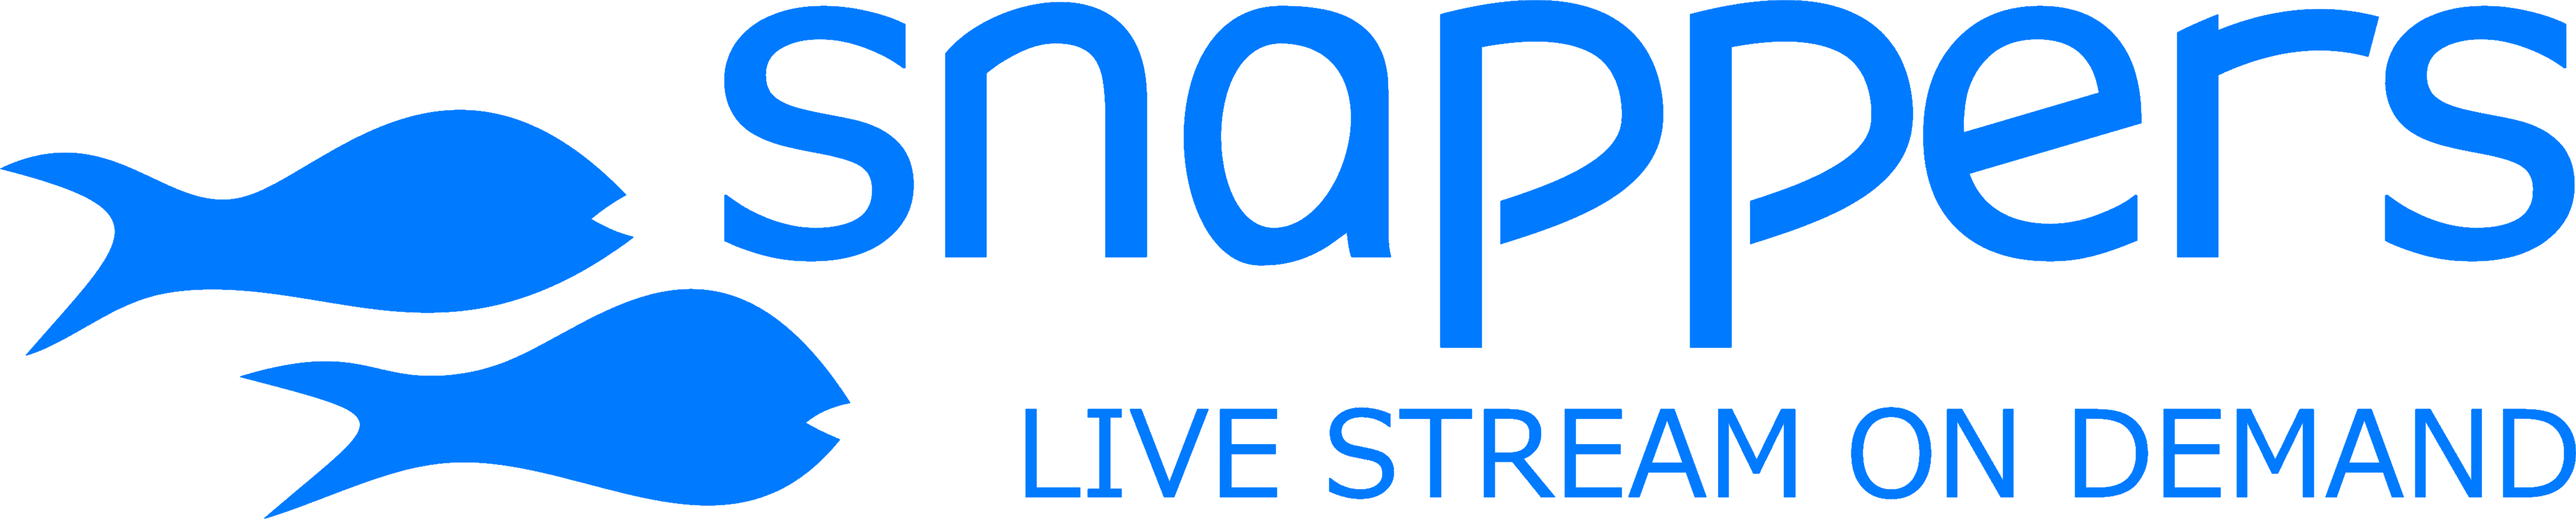 Snappers logo